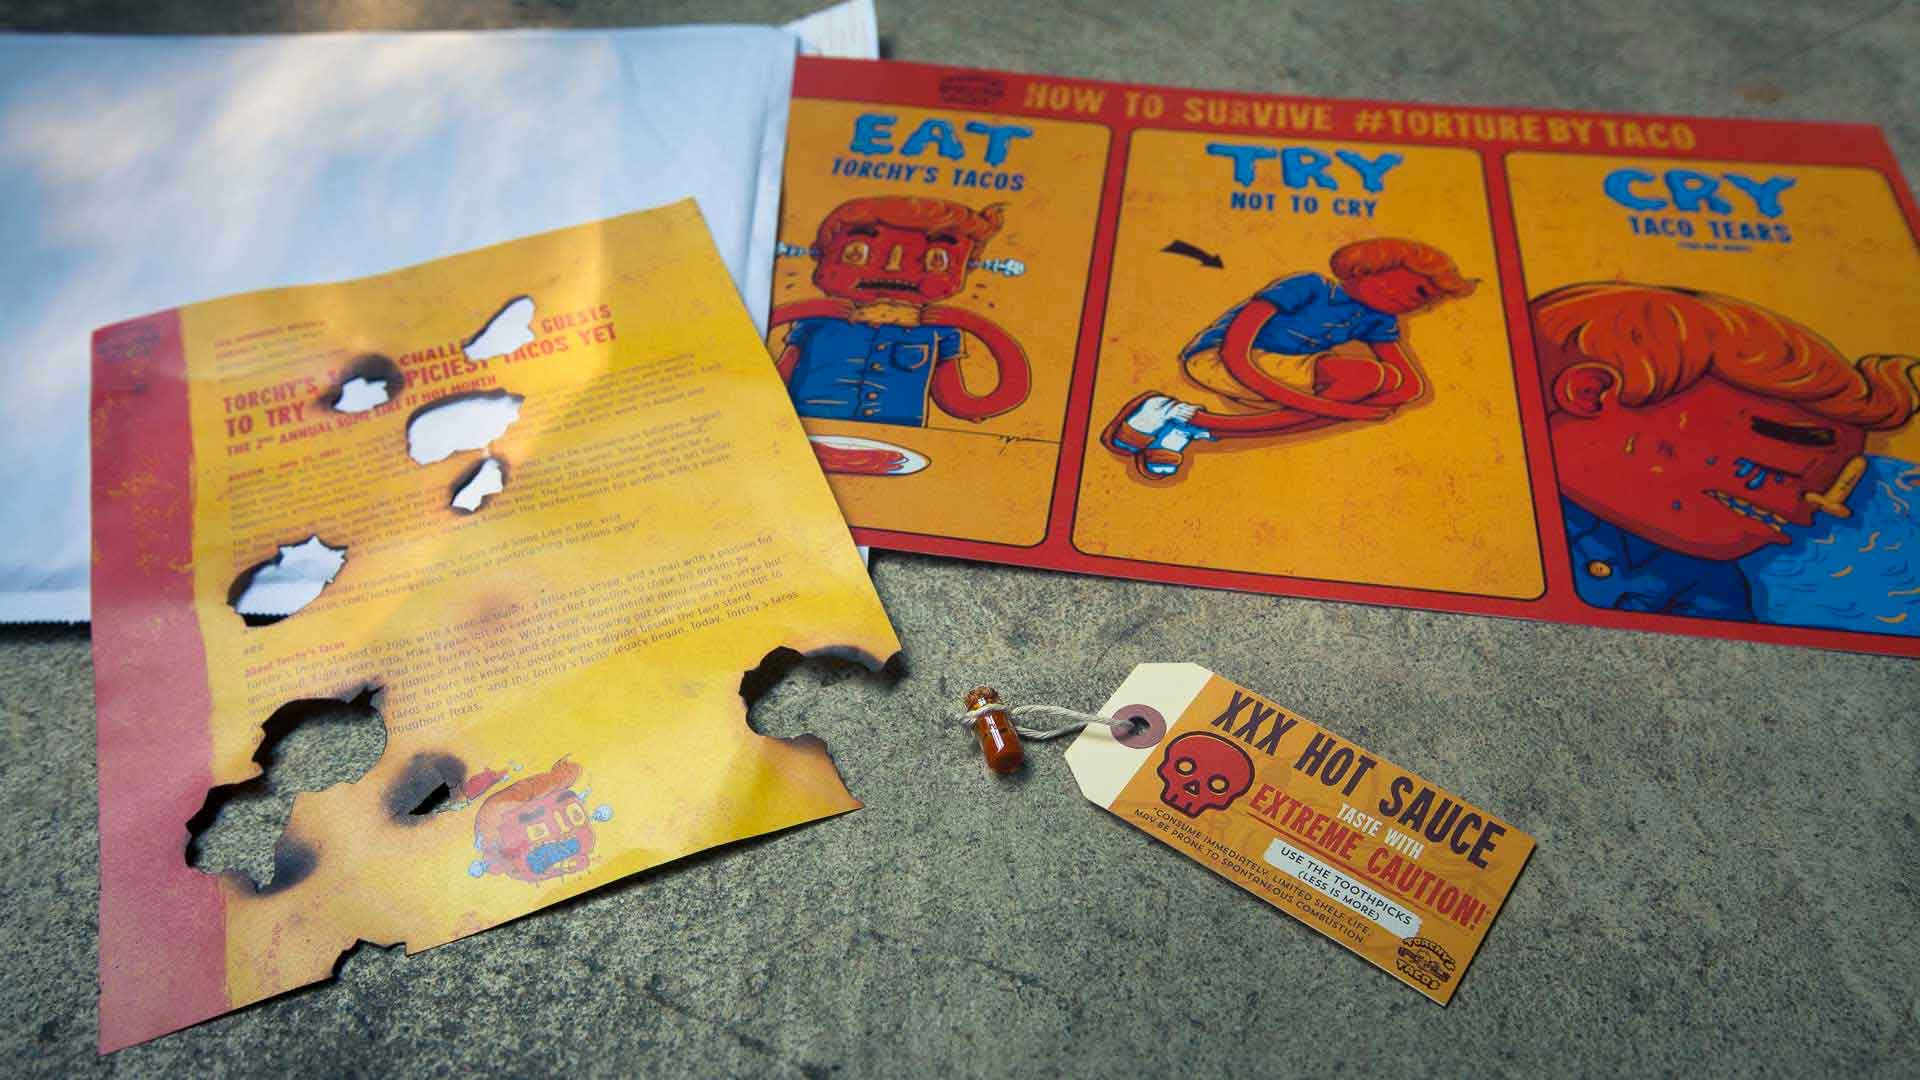 Creative PR/media kit designed for Torchy's Tacos' Some Like It Hot campaign